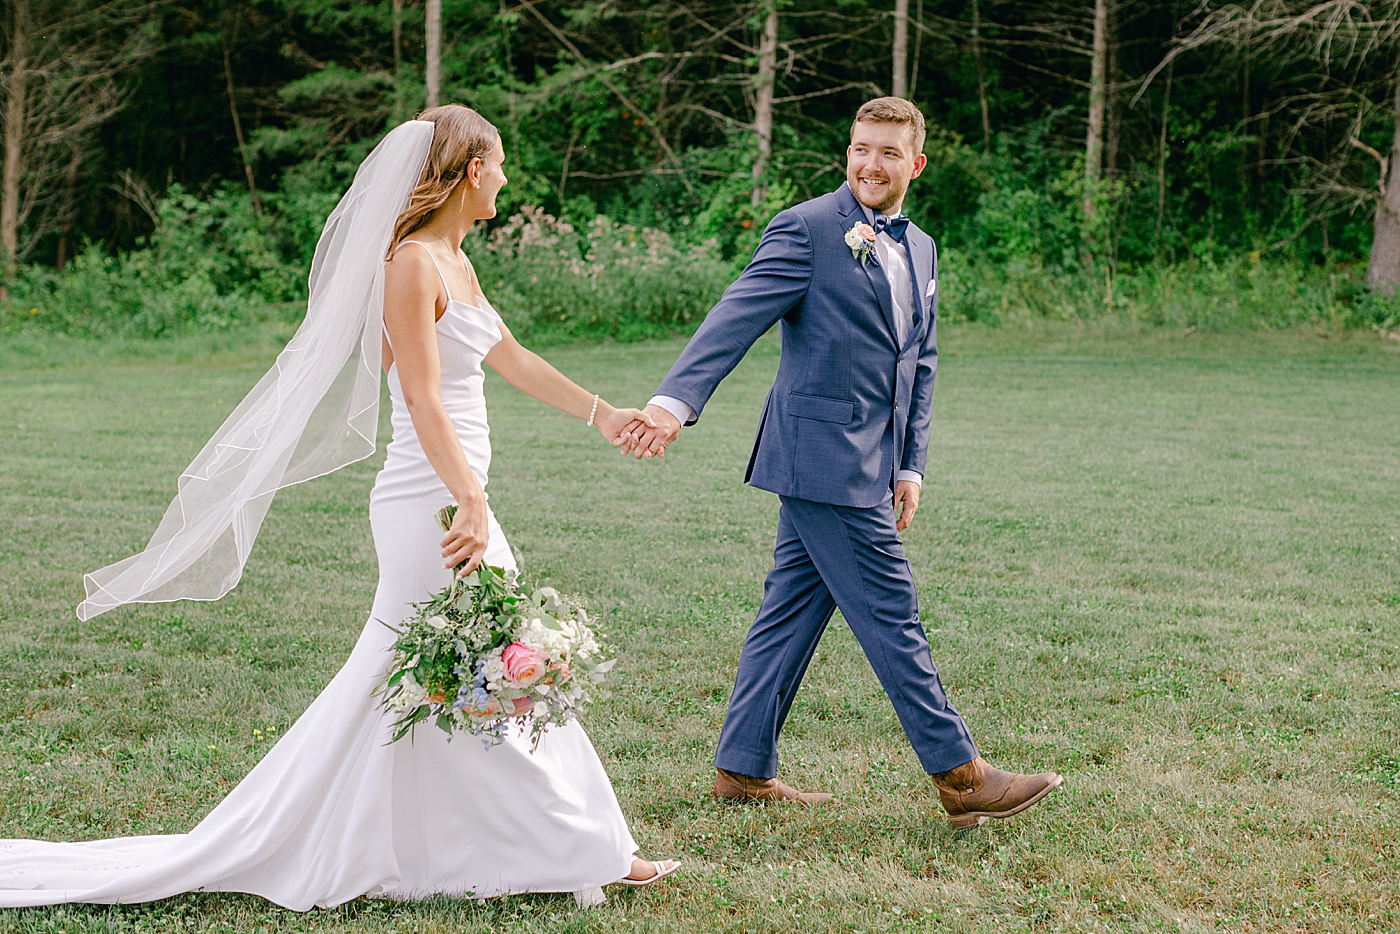 Bride and groom walking holding hands | Image by Hope Helmuth Photography